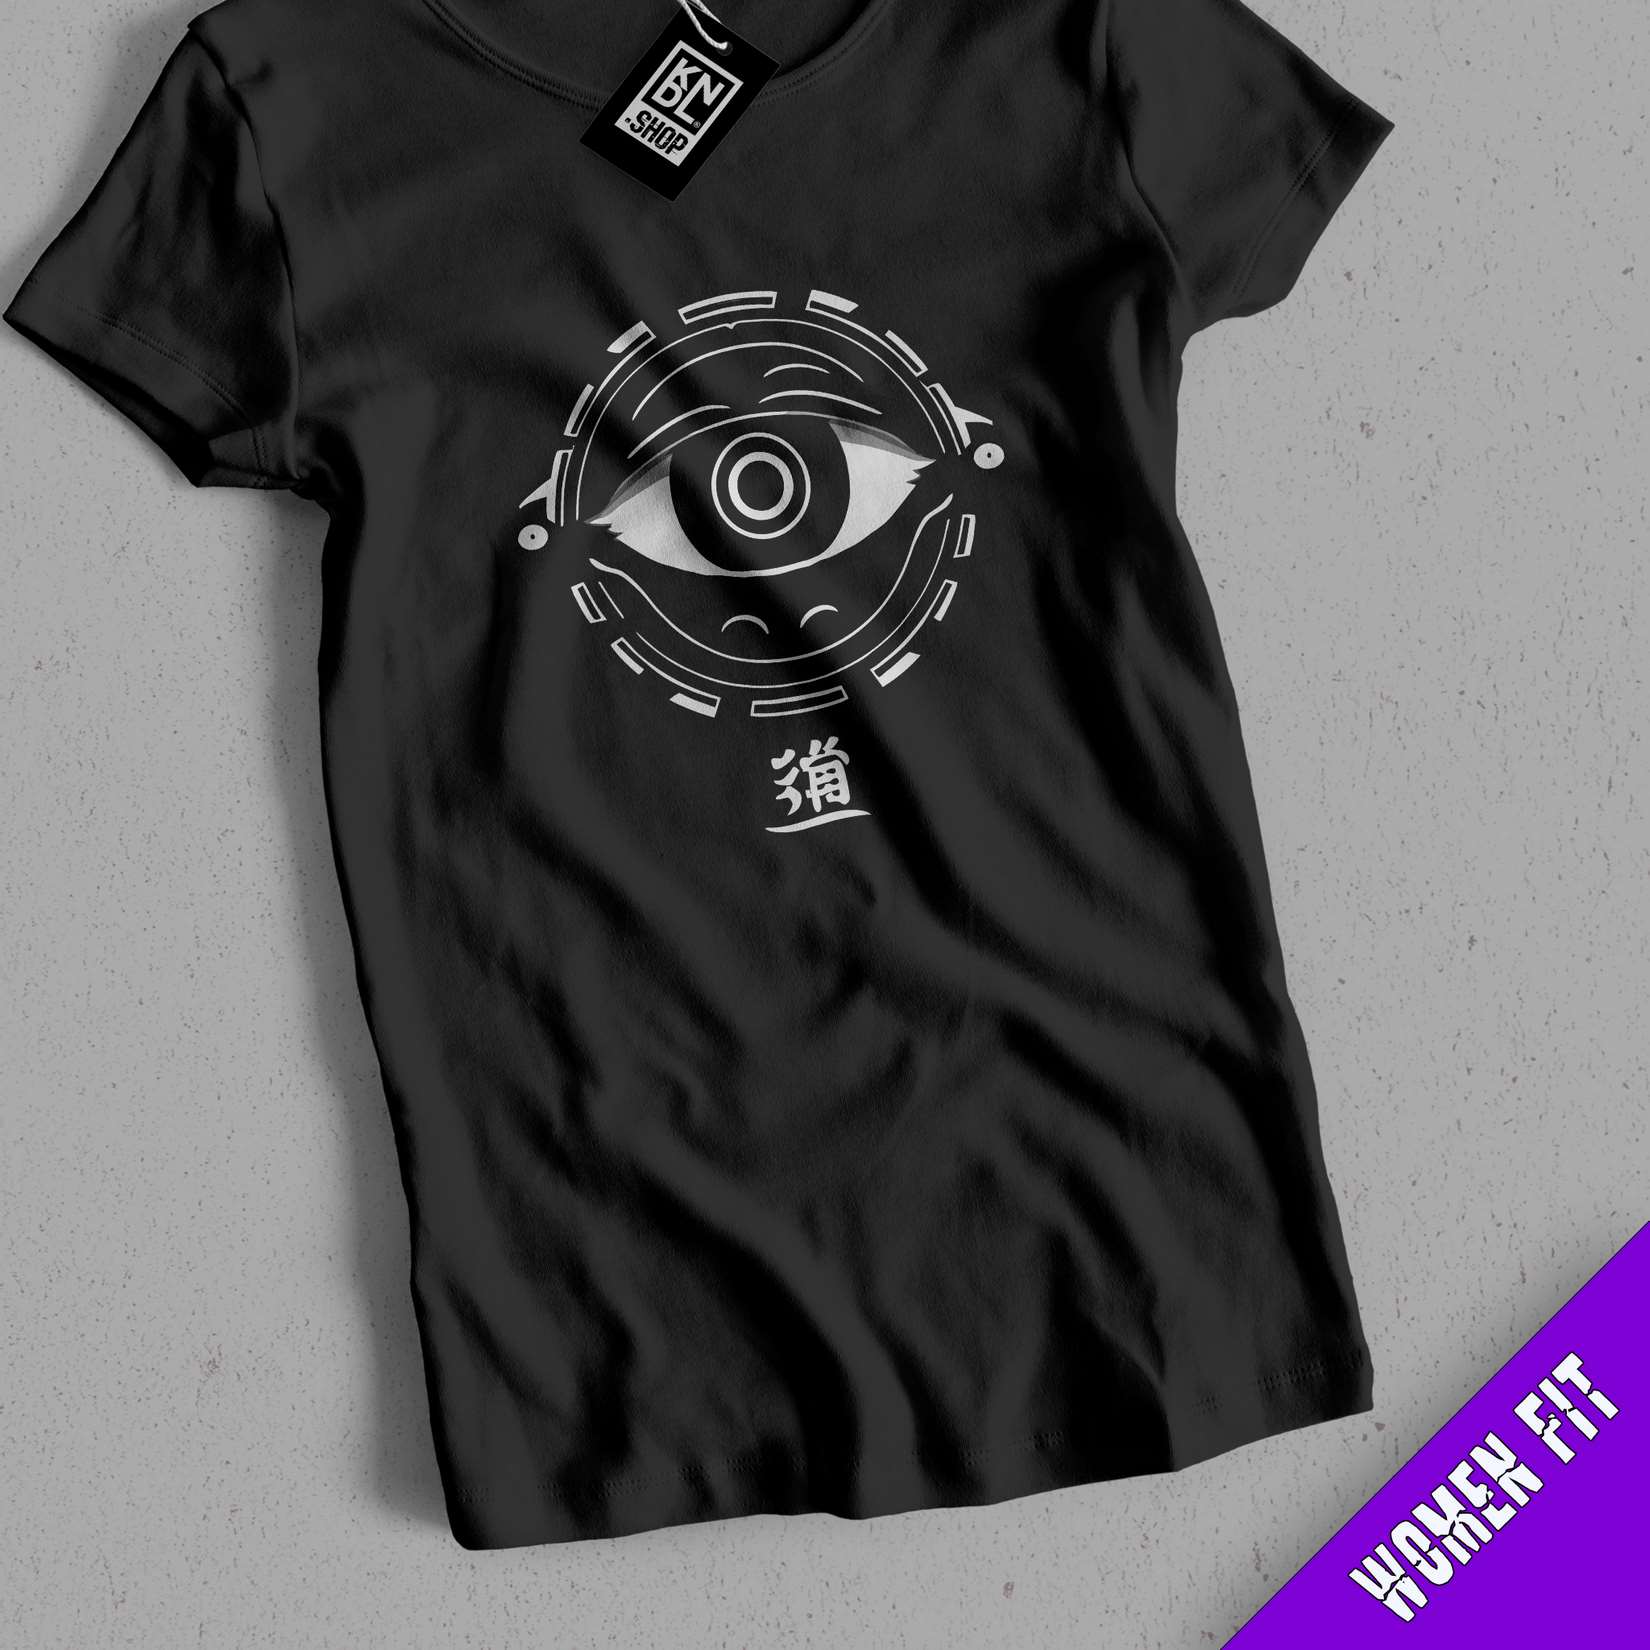 a black t - shirt with an eye on it